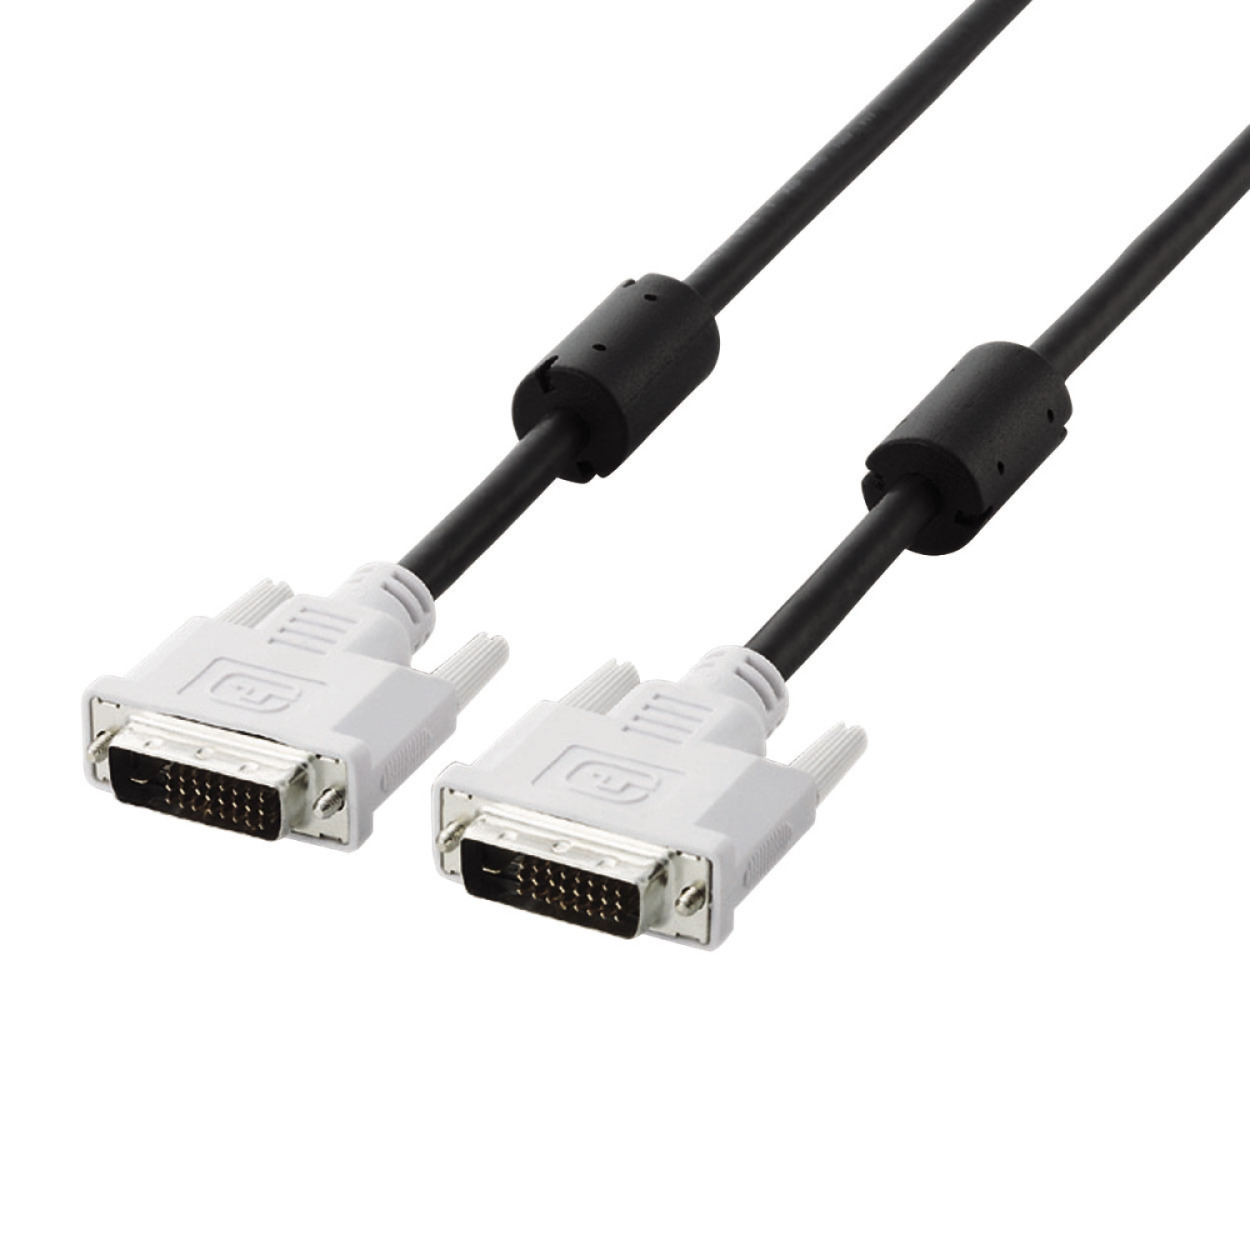 DVI Dual Link Cable, CAC-DVDLBK Series